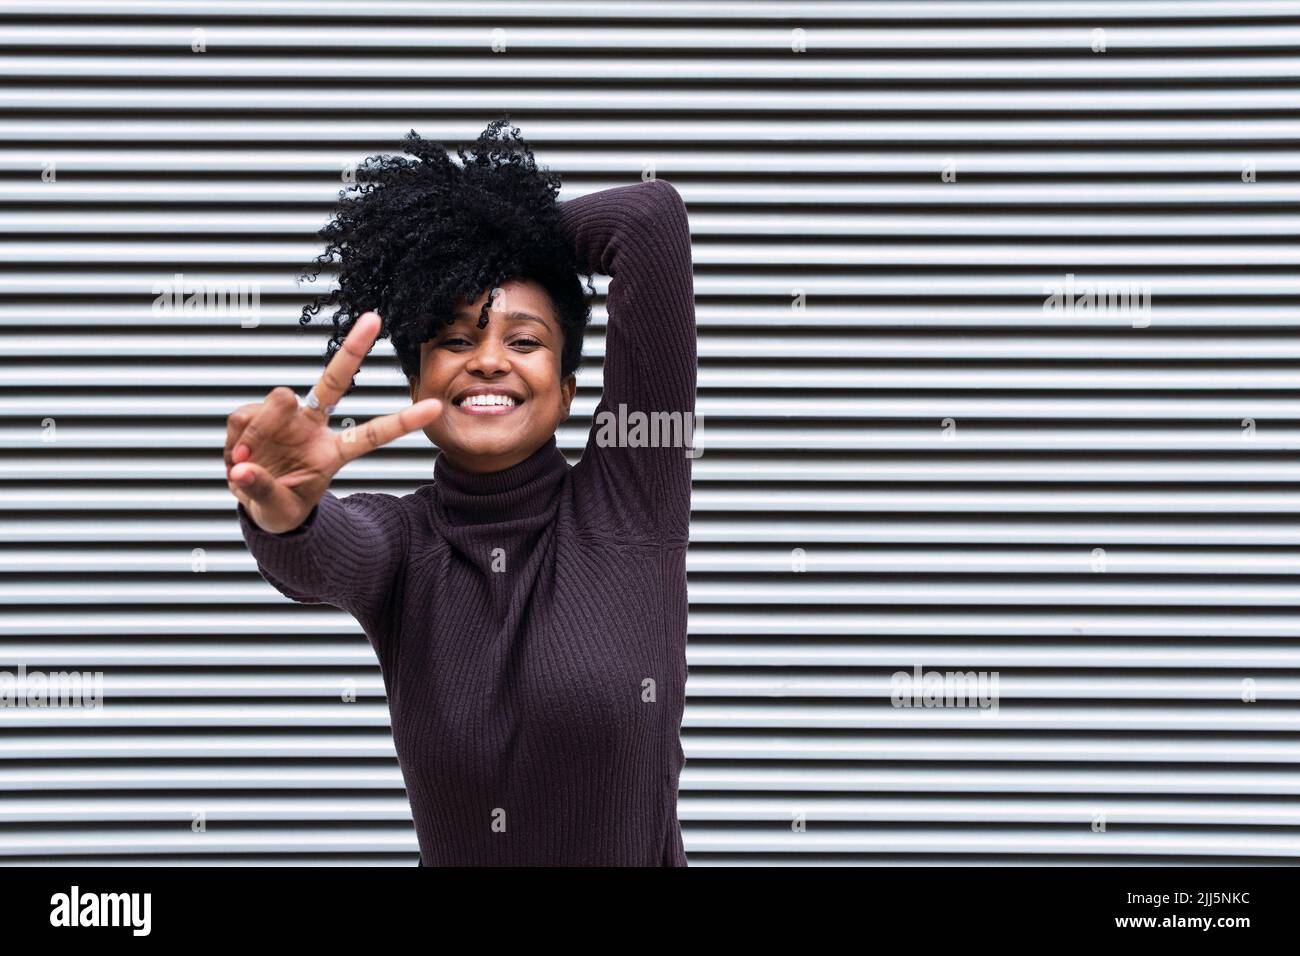 Happy woman with curly hair gesturing peace sign in front of wall Stock Photo